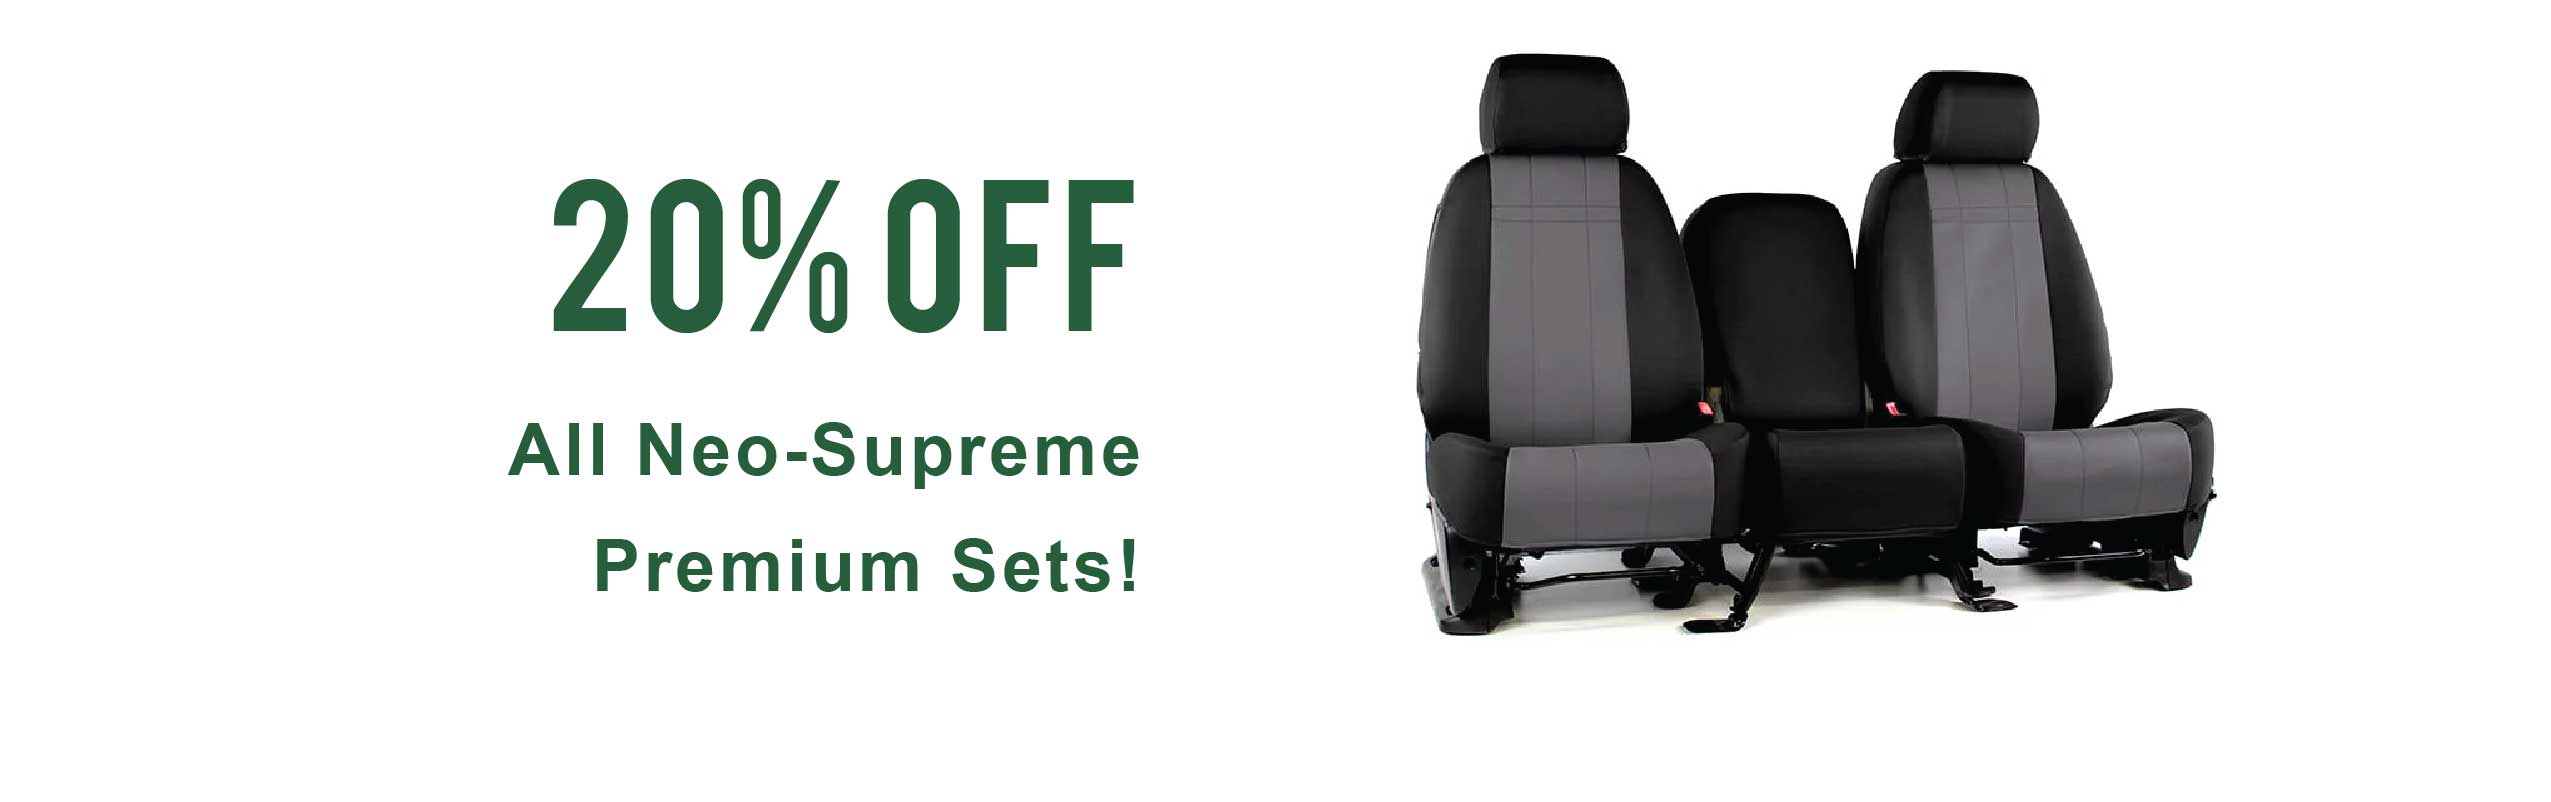 20% Off All Neo-Supreme Seat Covers!